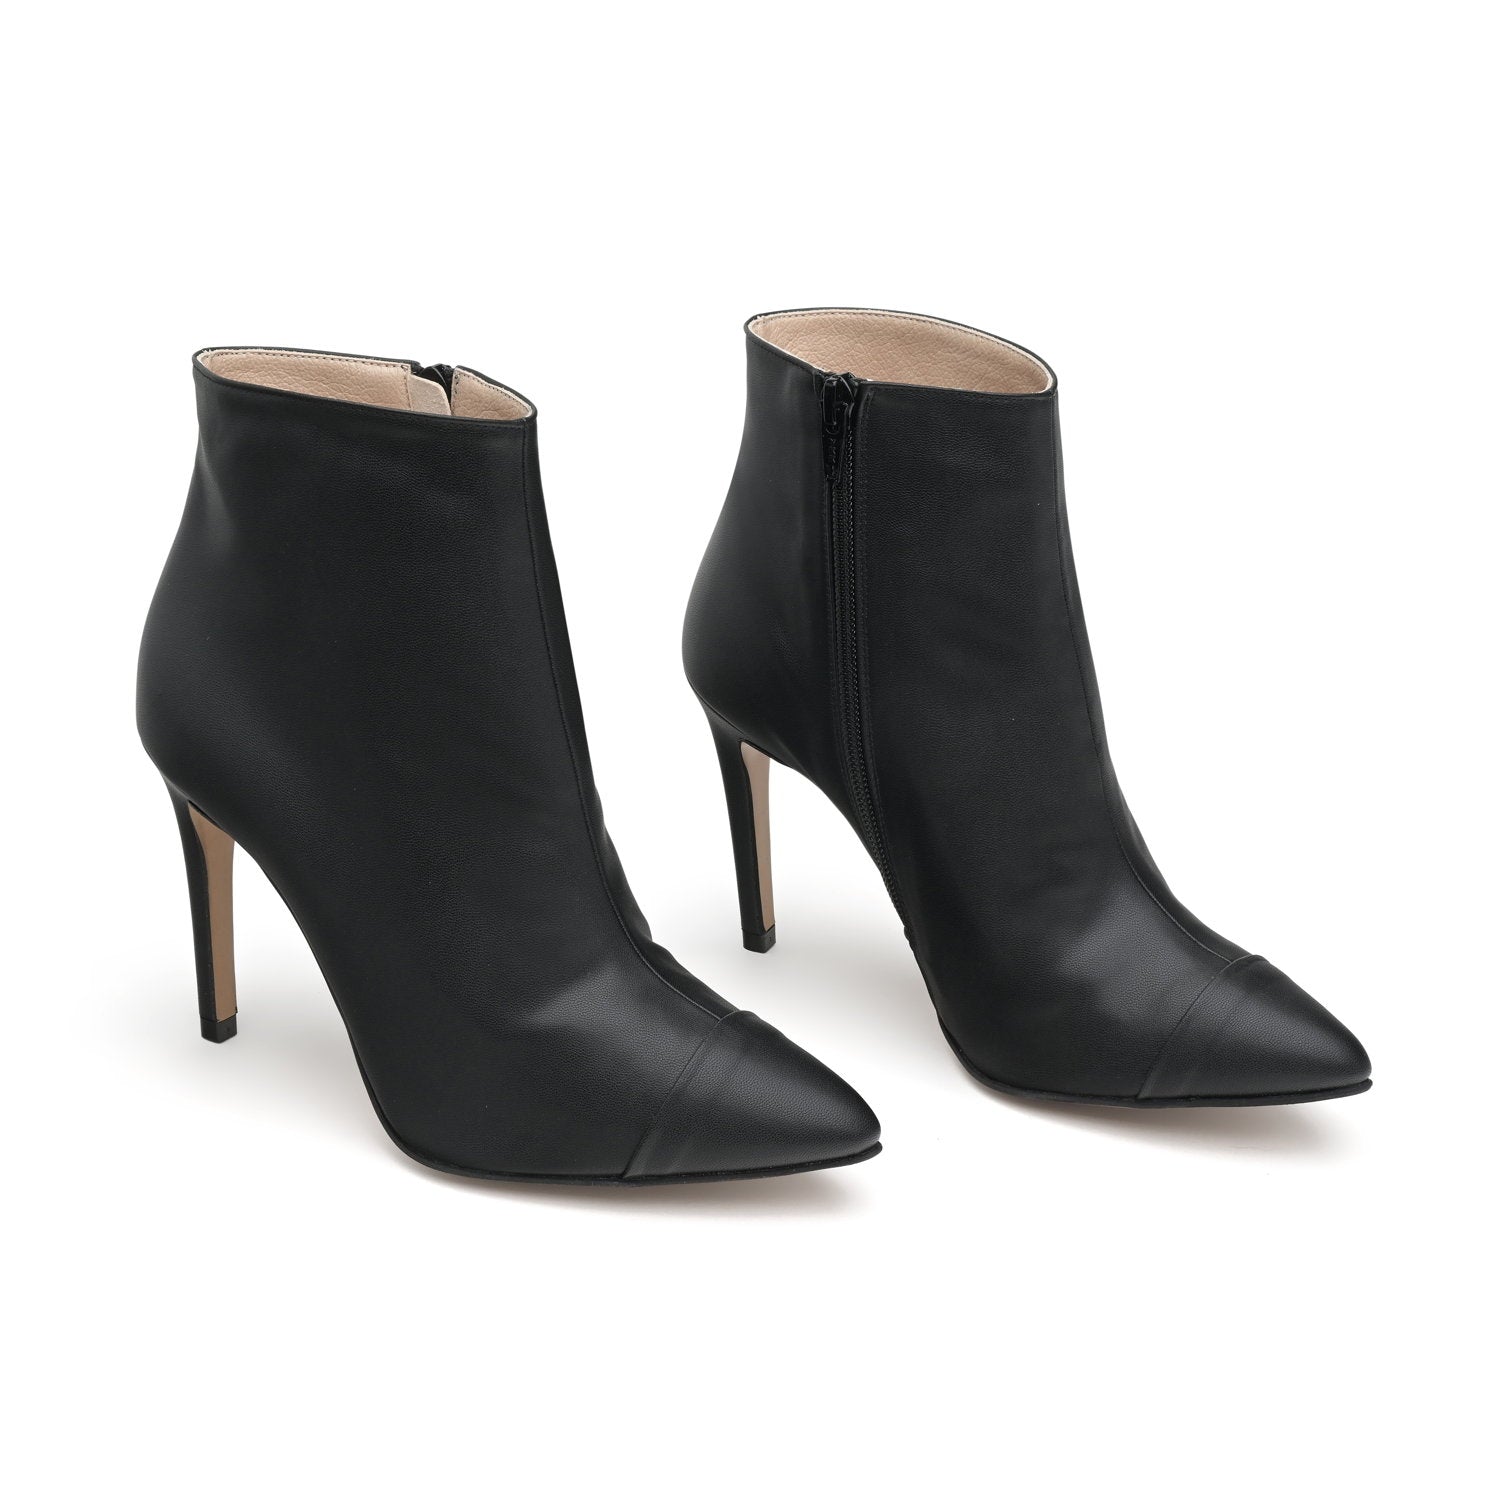 The Ankle Boot - vegan boots with 100mm heel